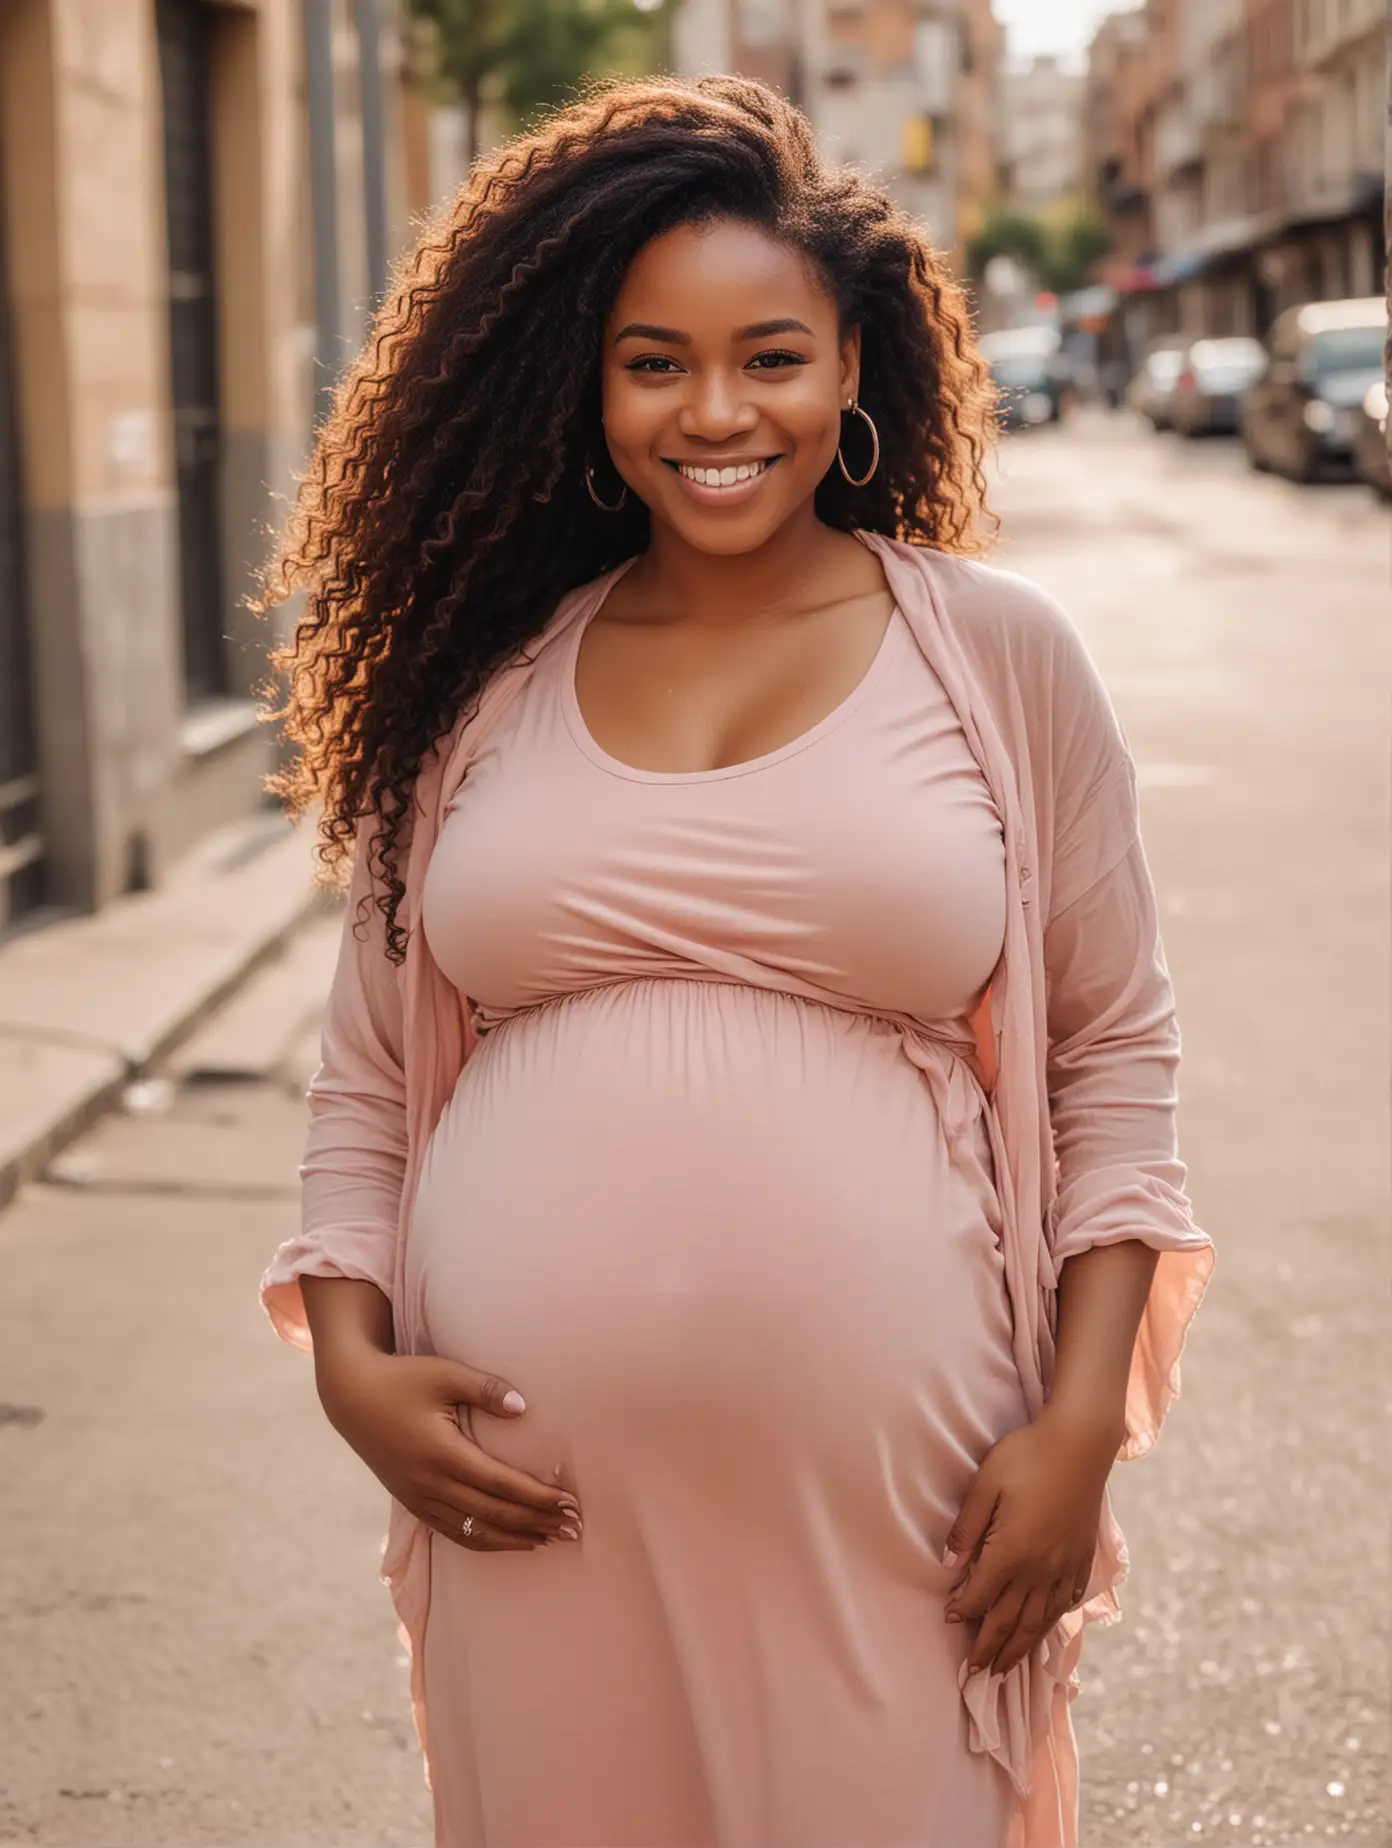 Radiant Pregnant African American Woman Smiling on Urban Street